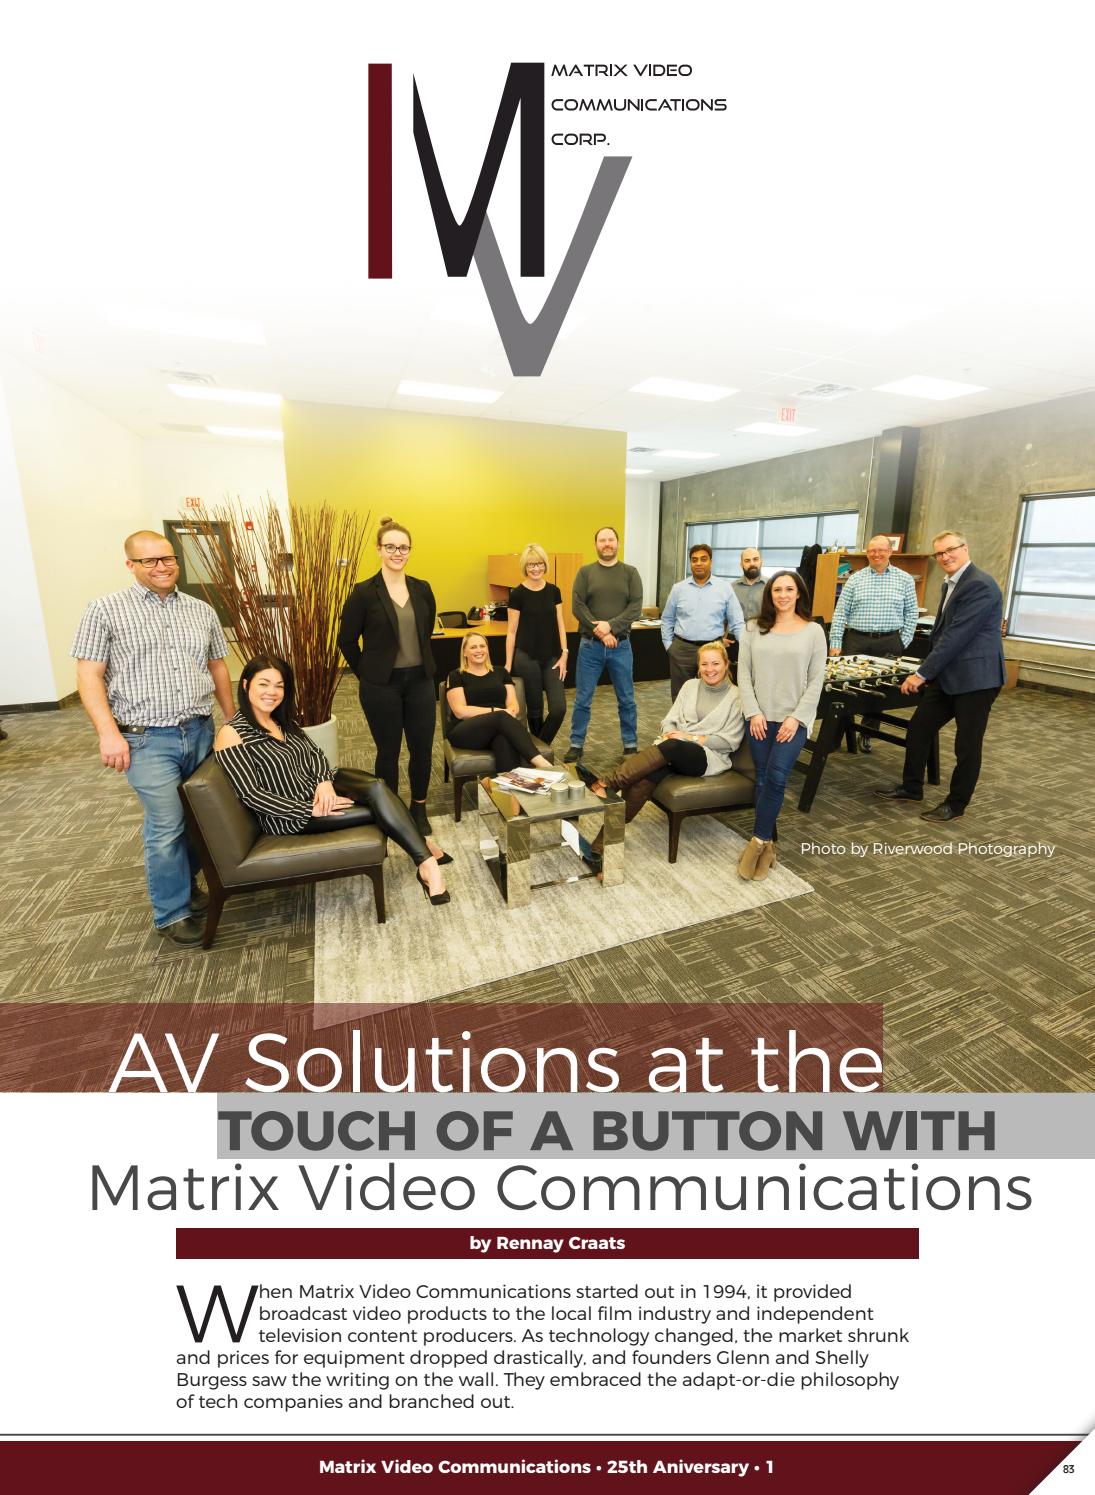 Business in Calgary Magazine - Business Profile for MAtrix Video Communication